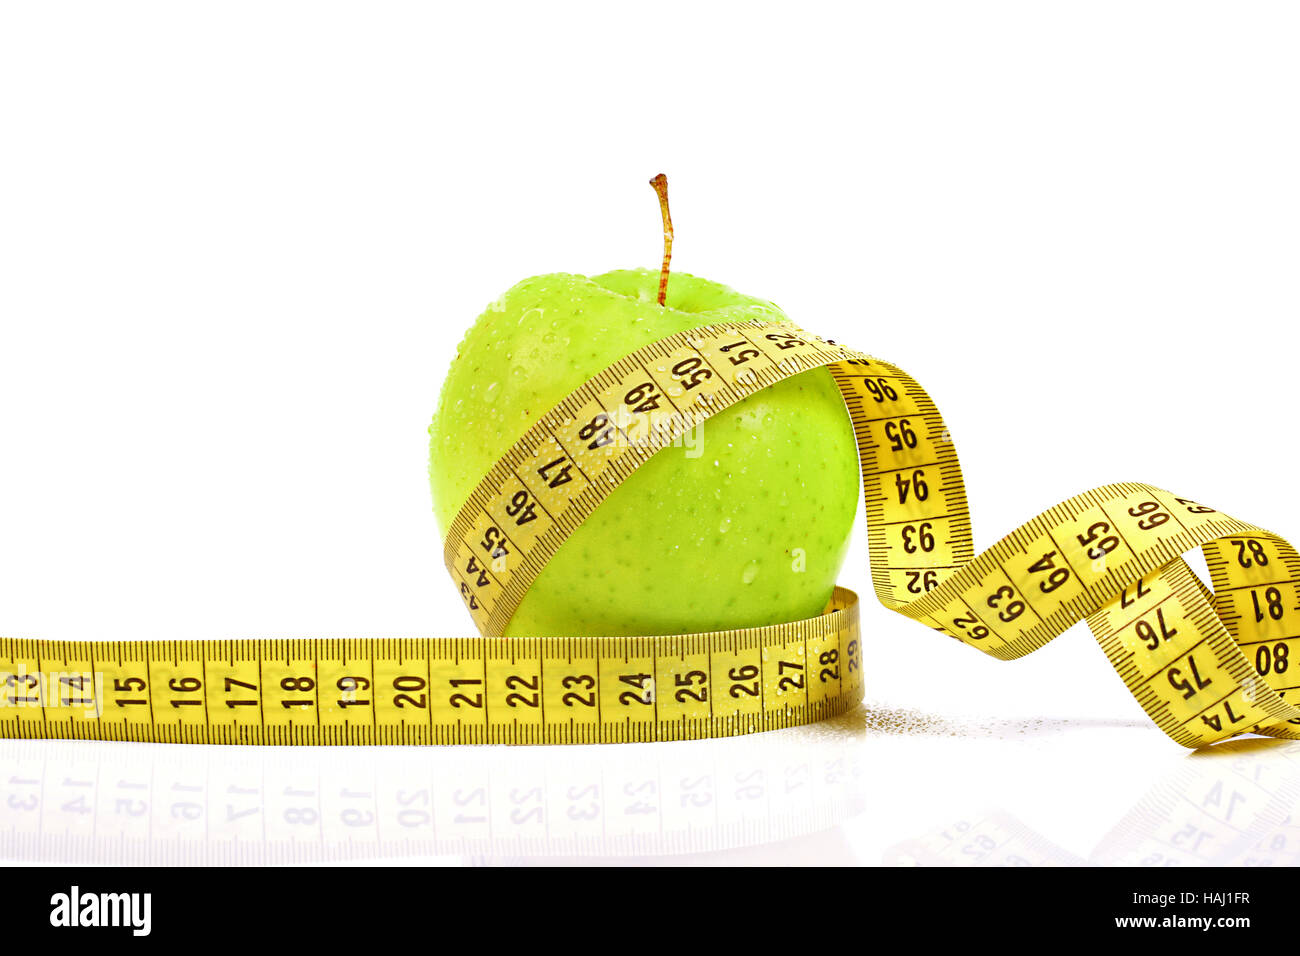 diet concept. apple with measuring tape Stock Photo